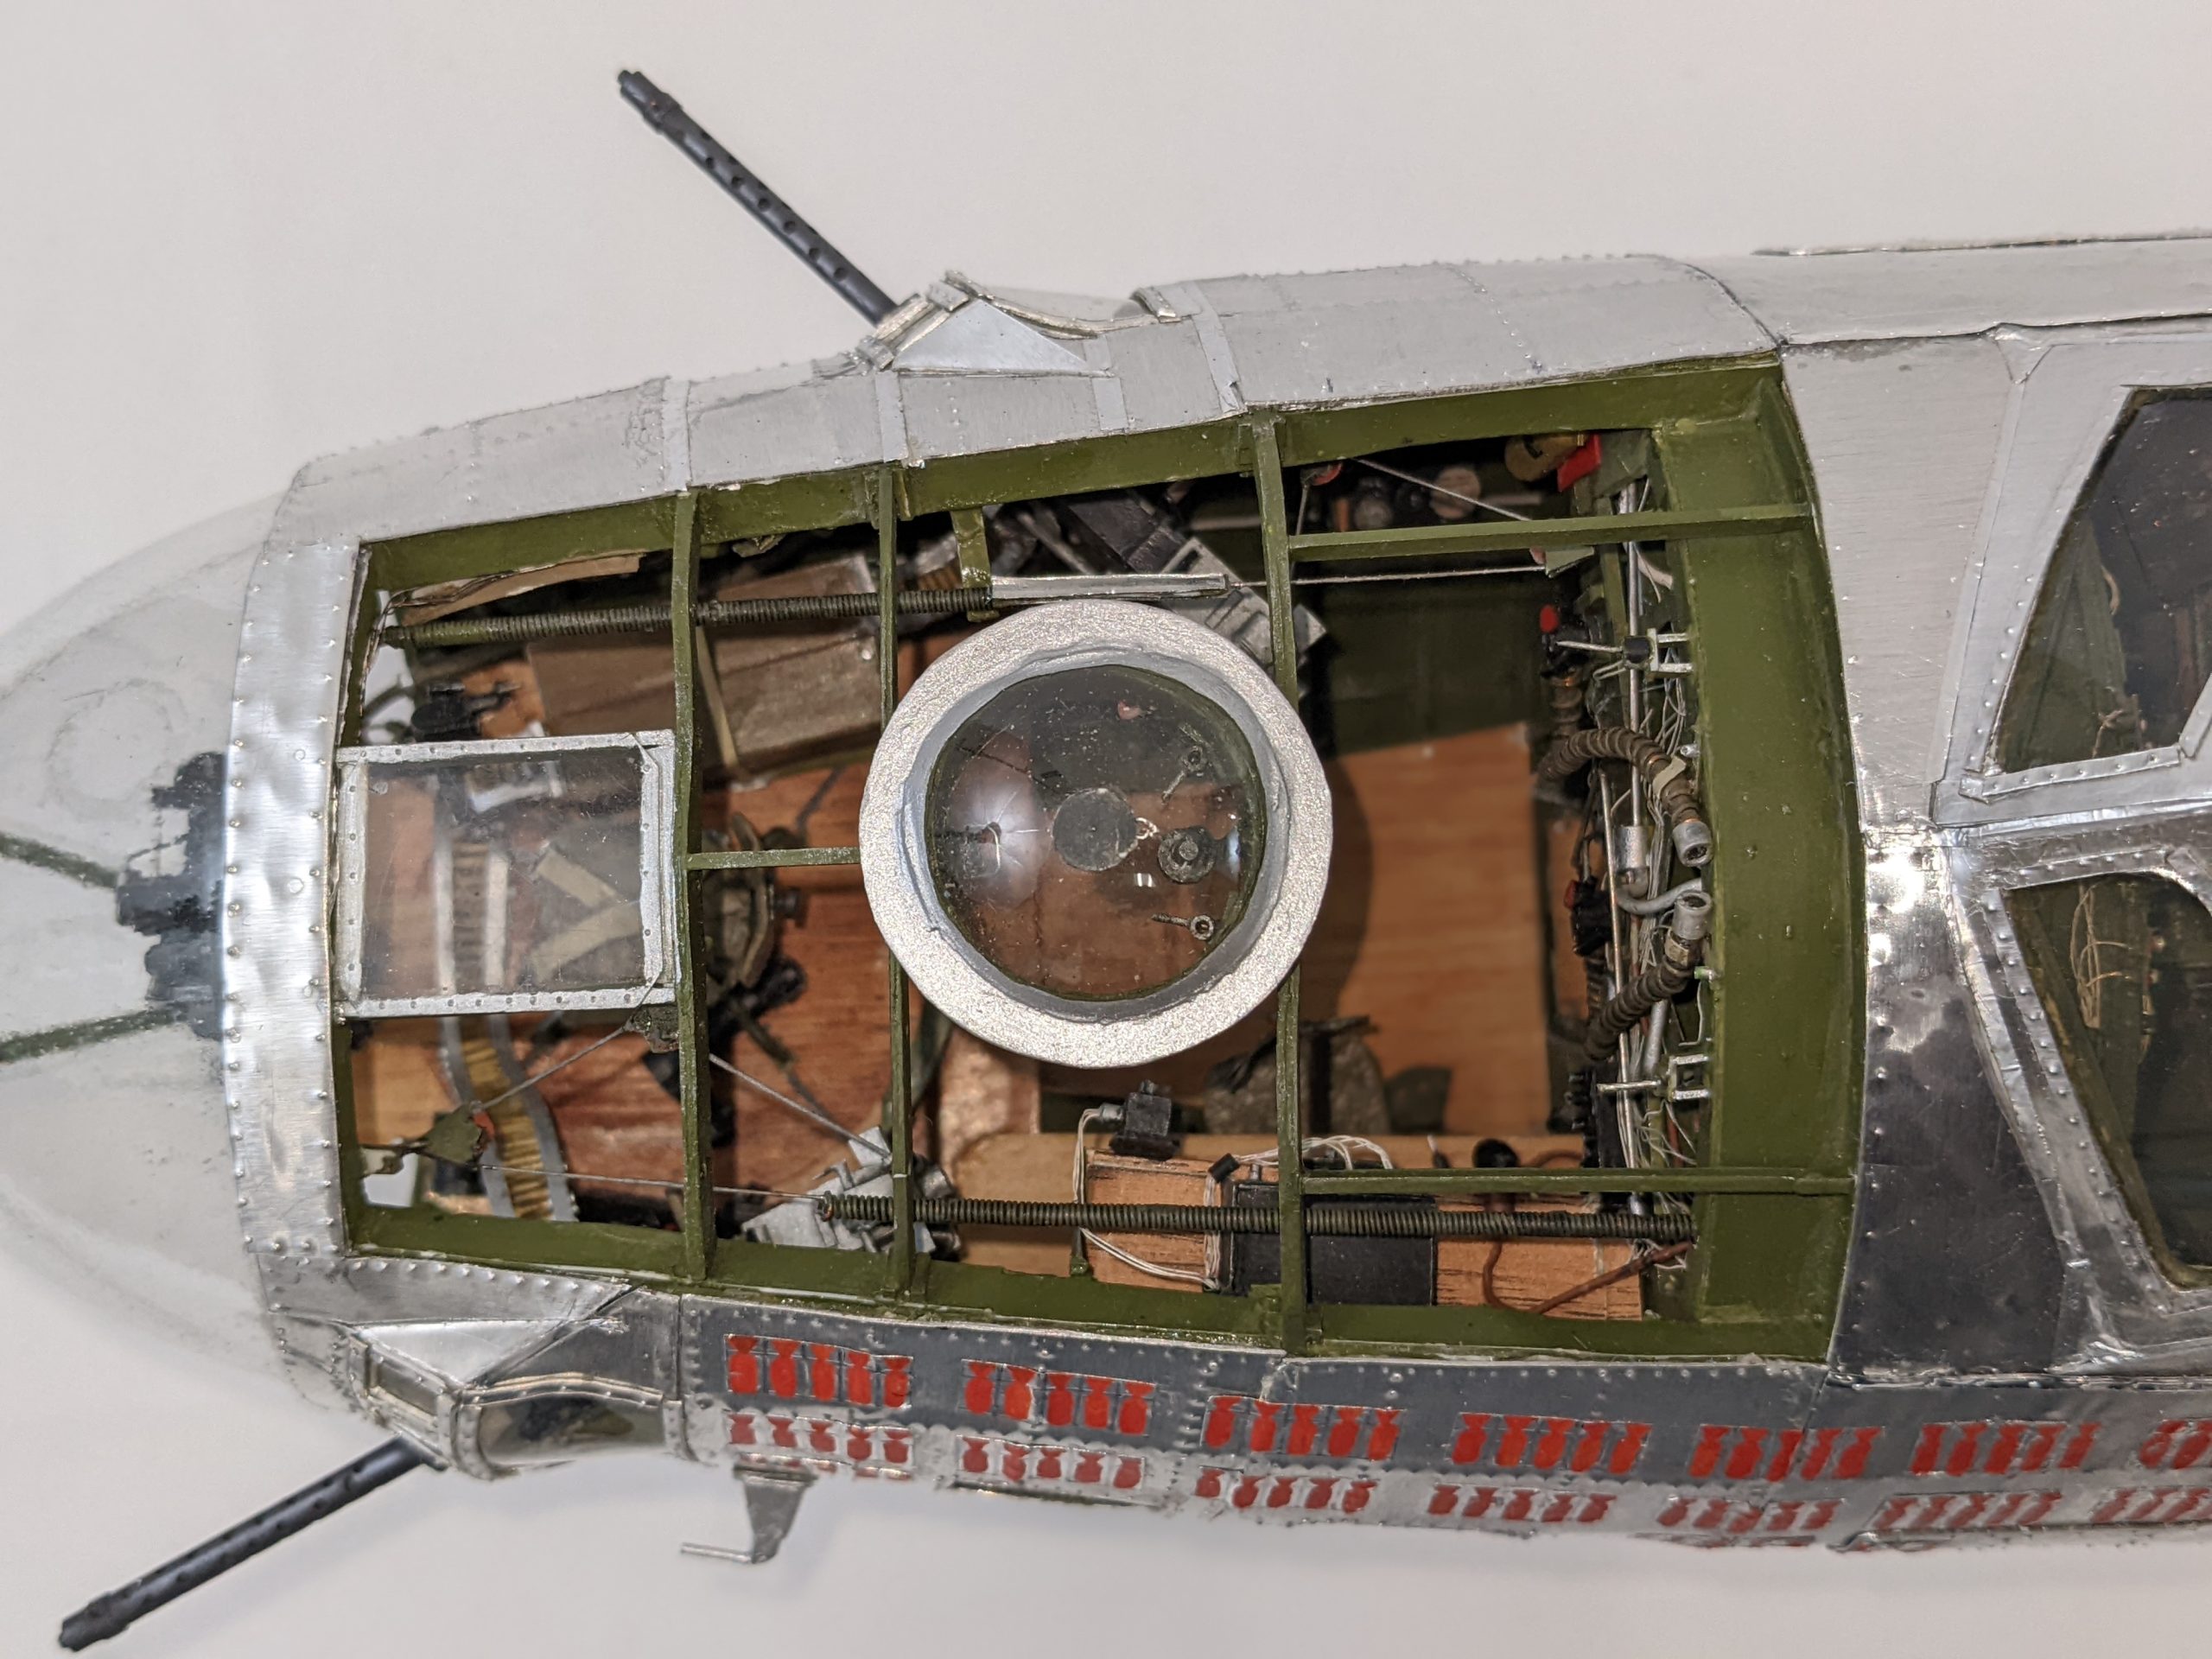 An overhead view of the nose section of Martin's scale model B-17G fuselage.